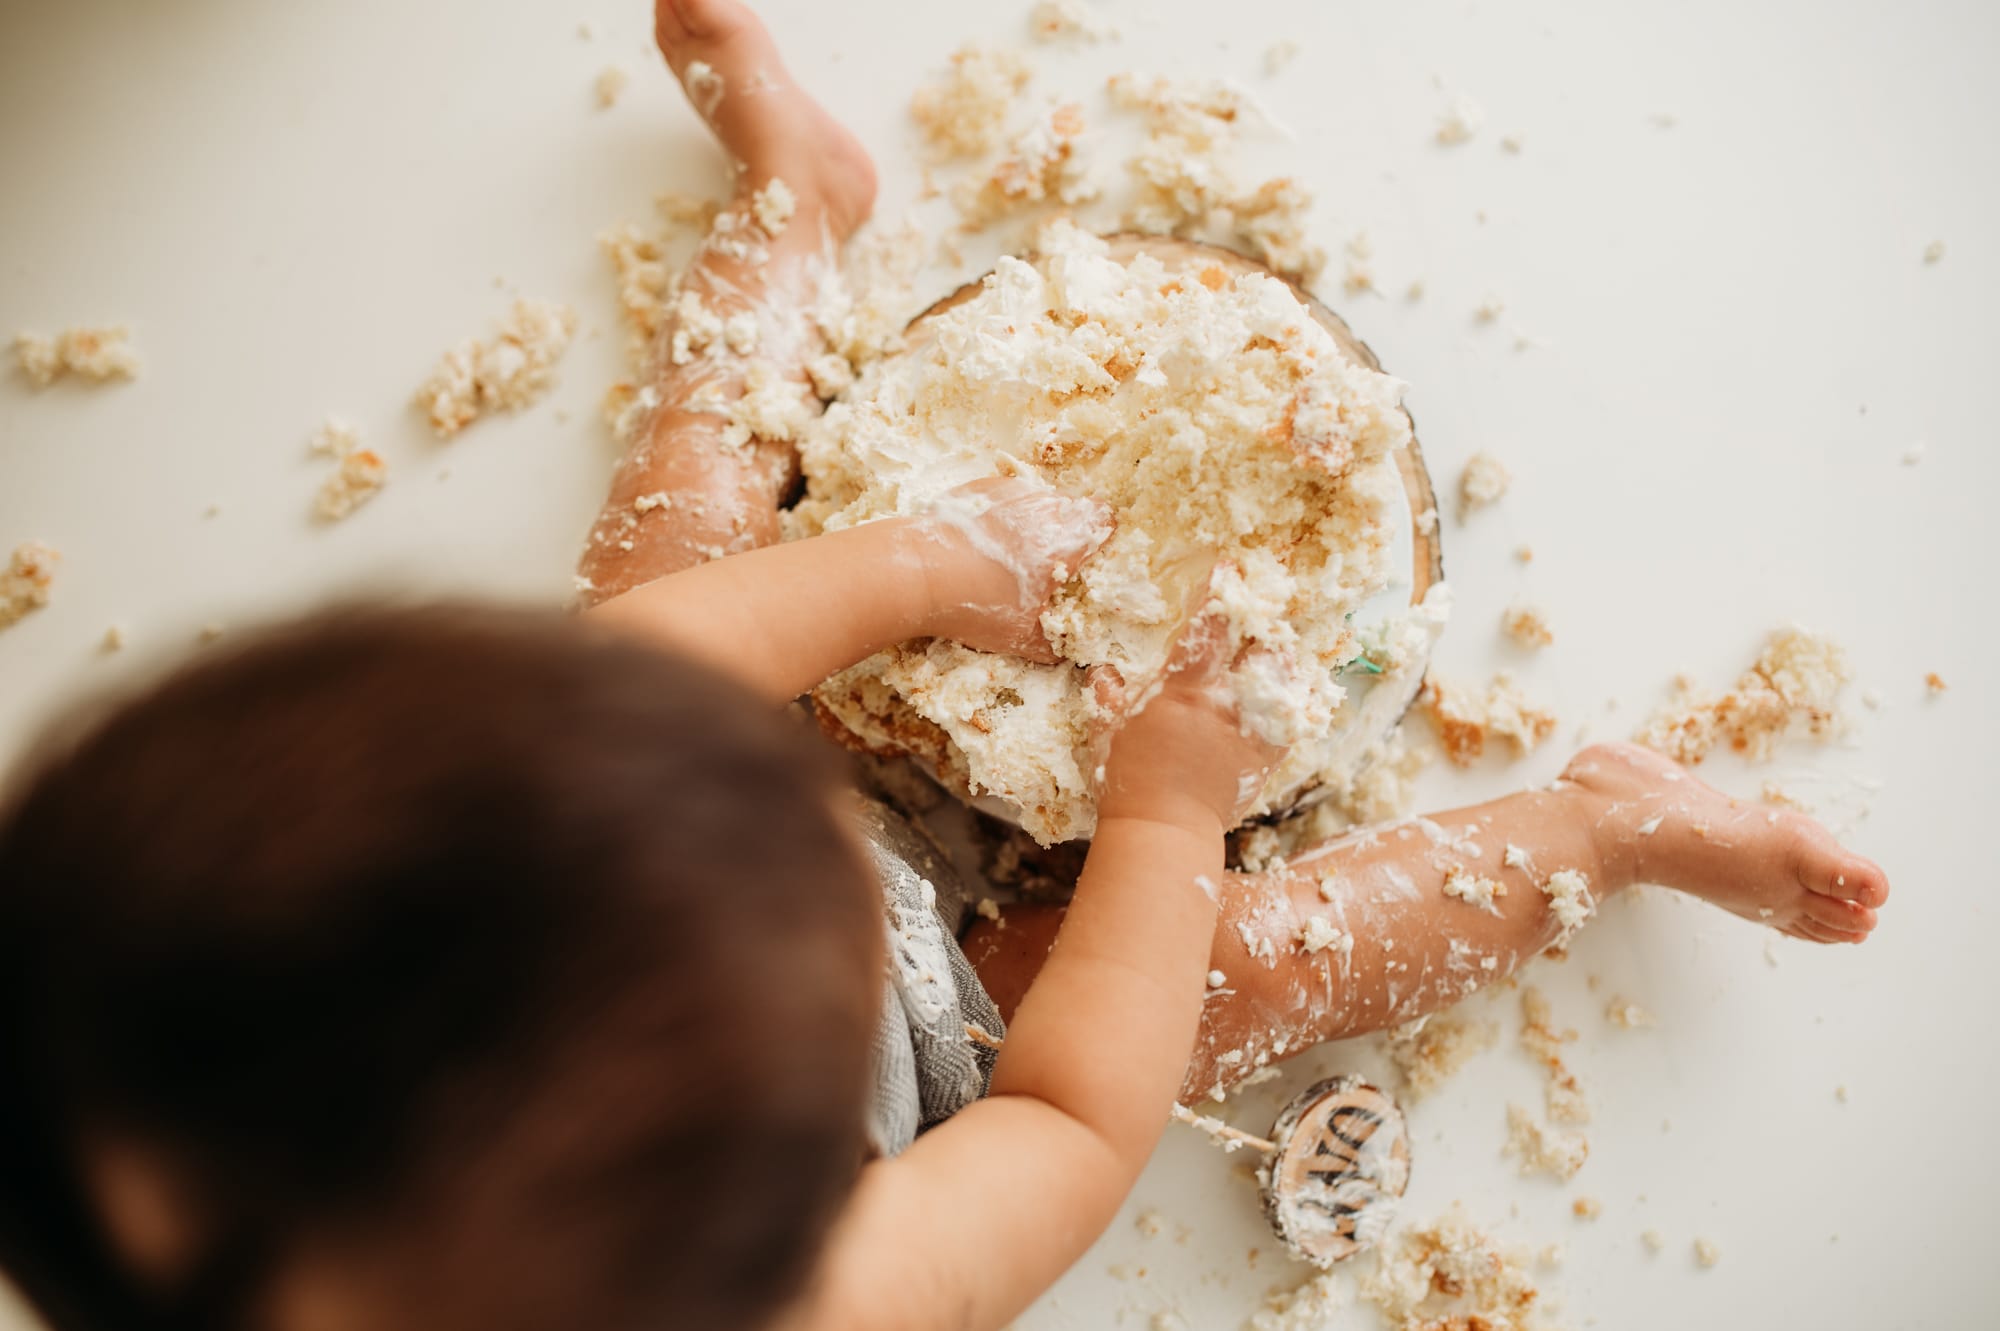 Cake smashing! Child digs their fingers through a destroyed cake during cake smash session.